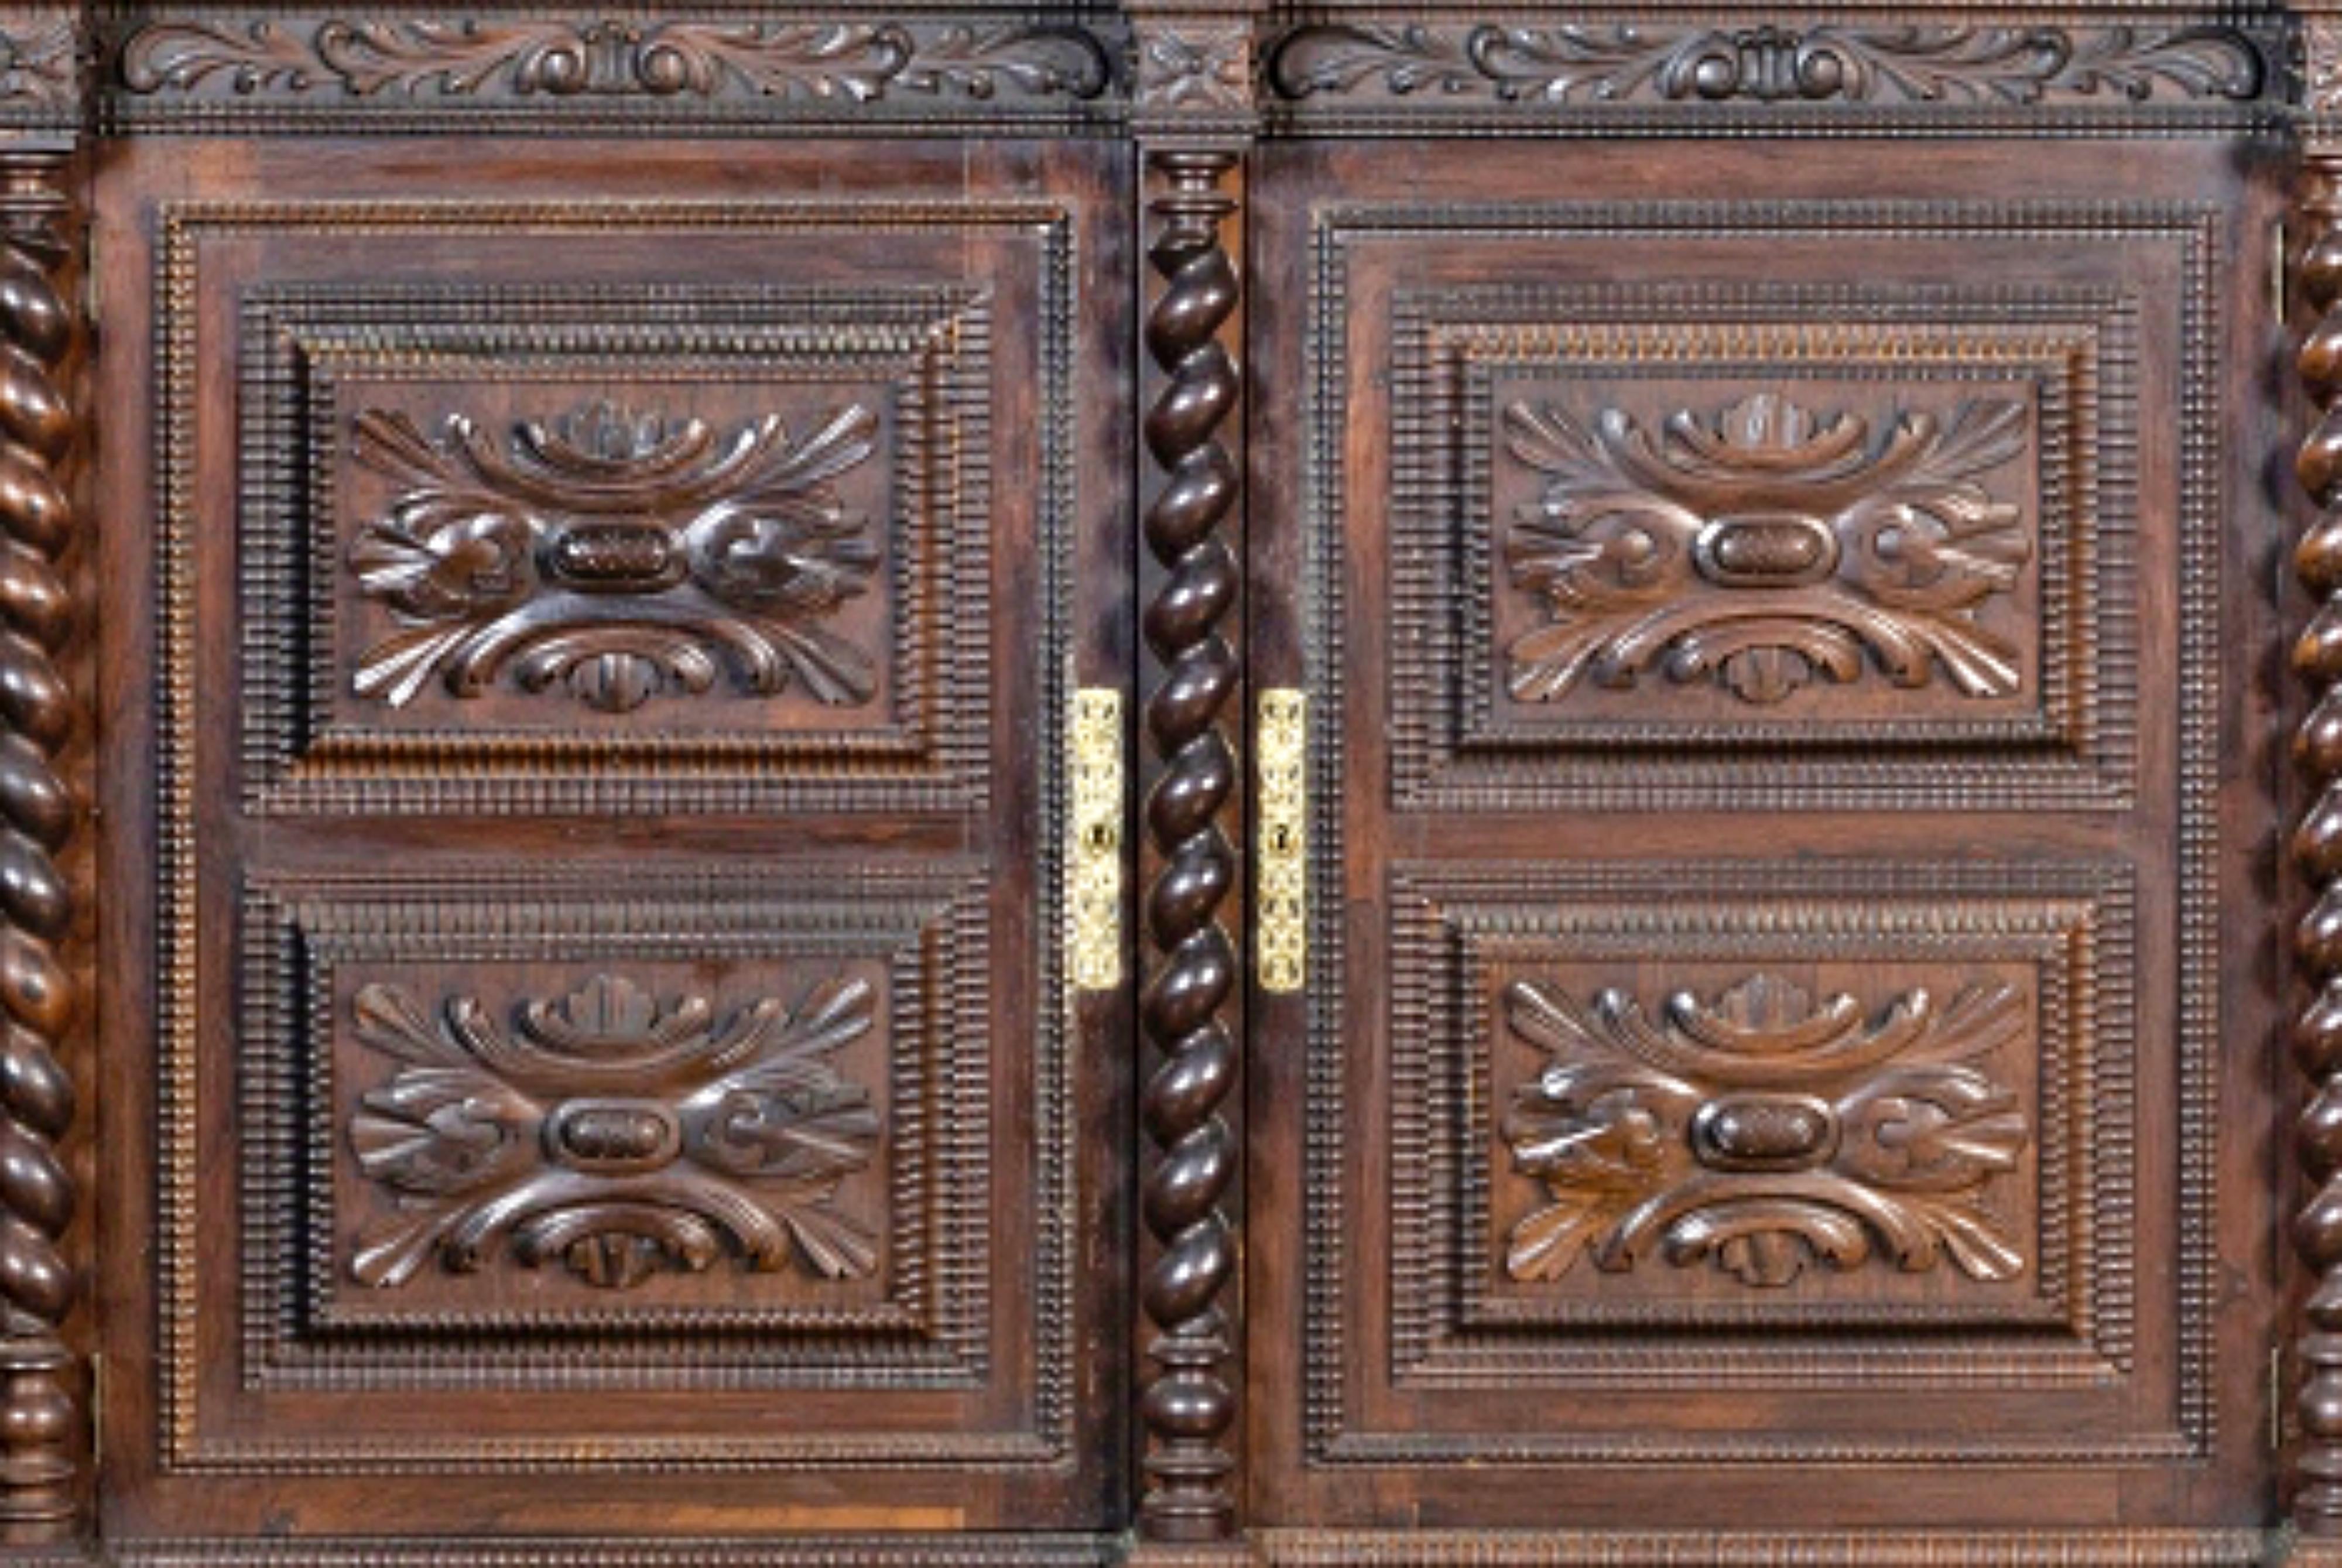 PAIR OF 19th Century PORTUGUESE CABINETS

in carved Brazilian rosewood. 
With four padded doors and two drawers. Interior with shelves. 
Yellow metal hardware. Small defects. 
Dim.: 213 x 177 x 65 cm.